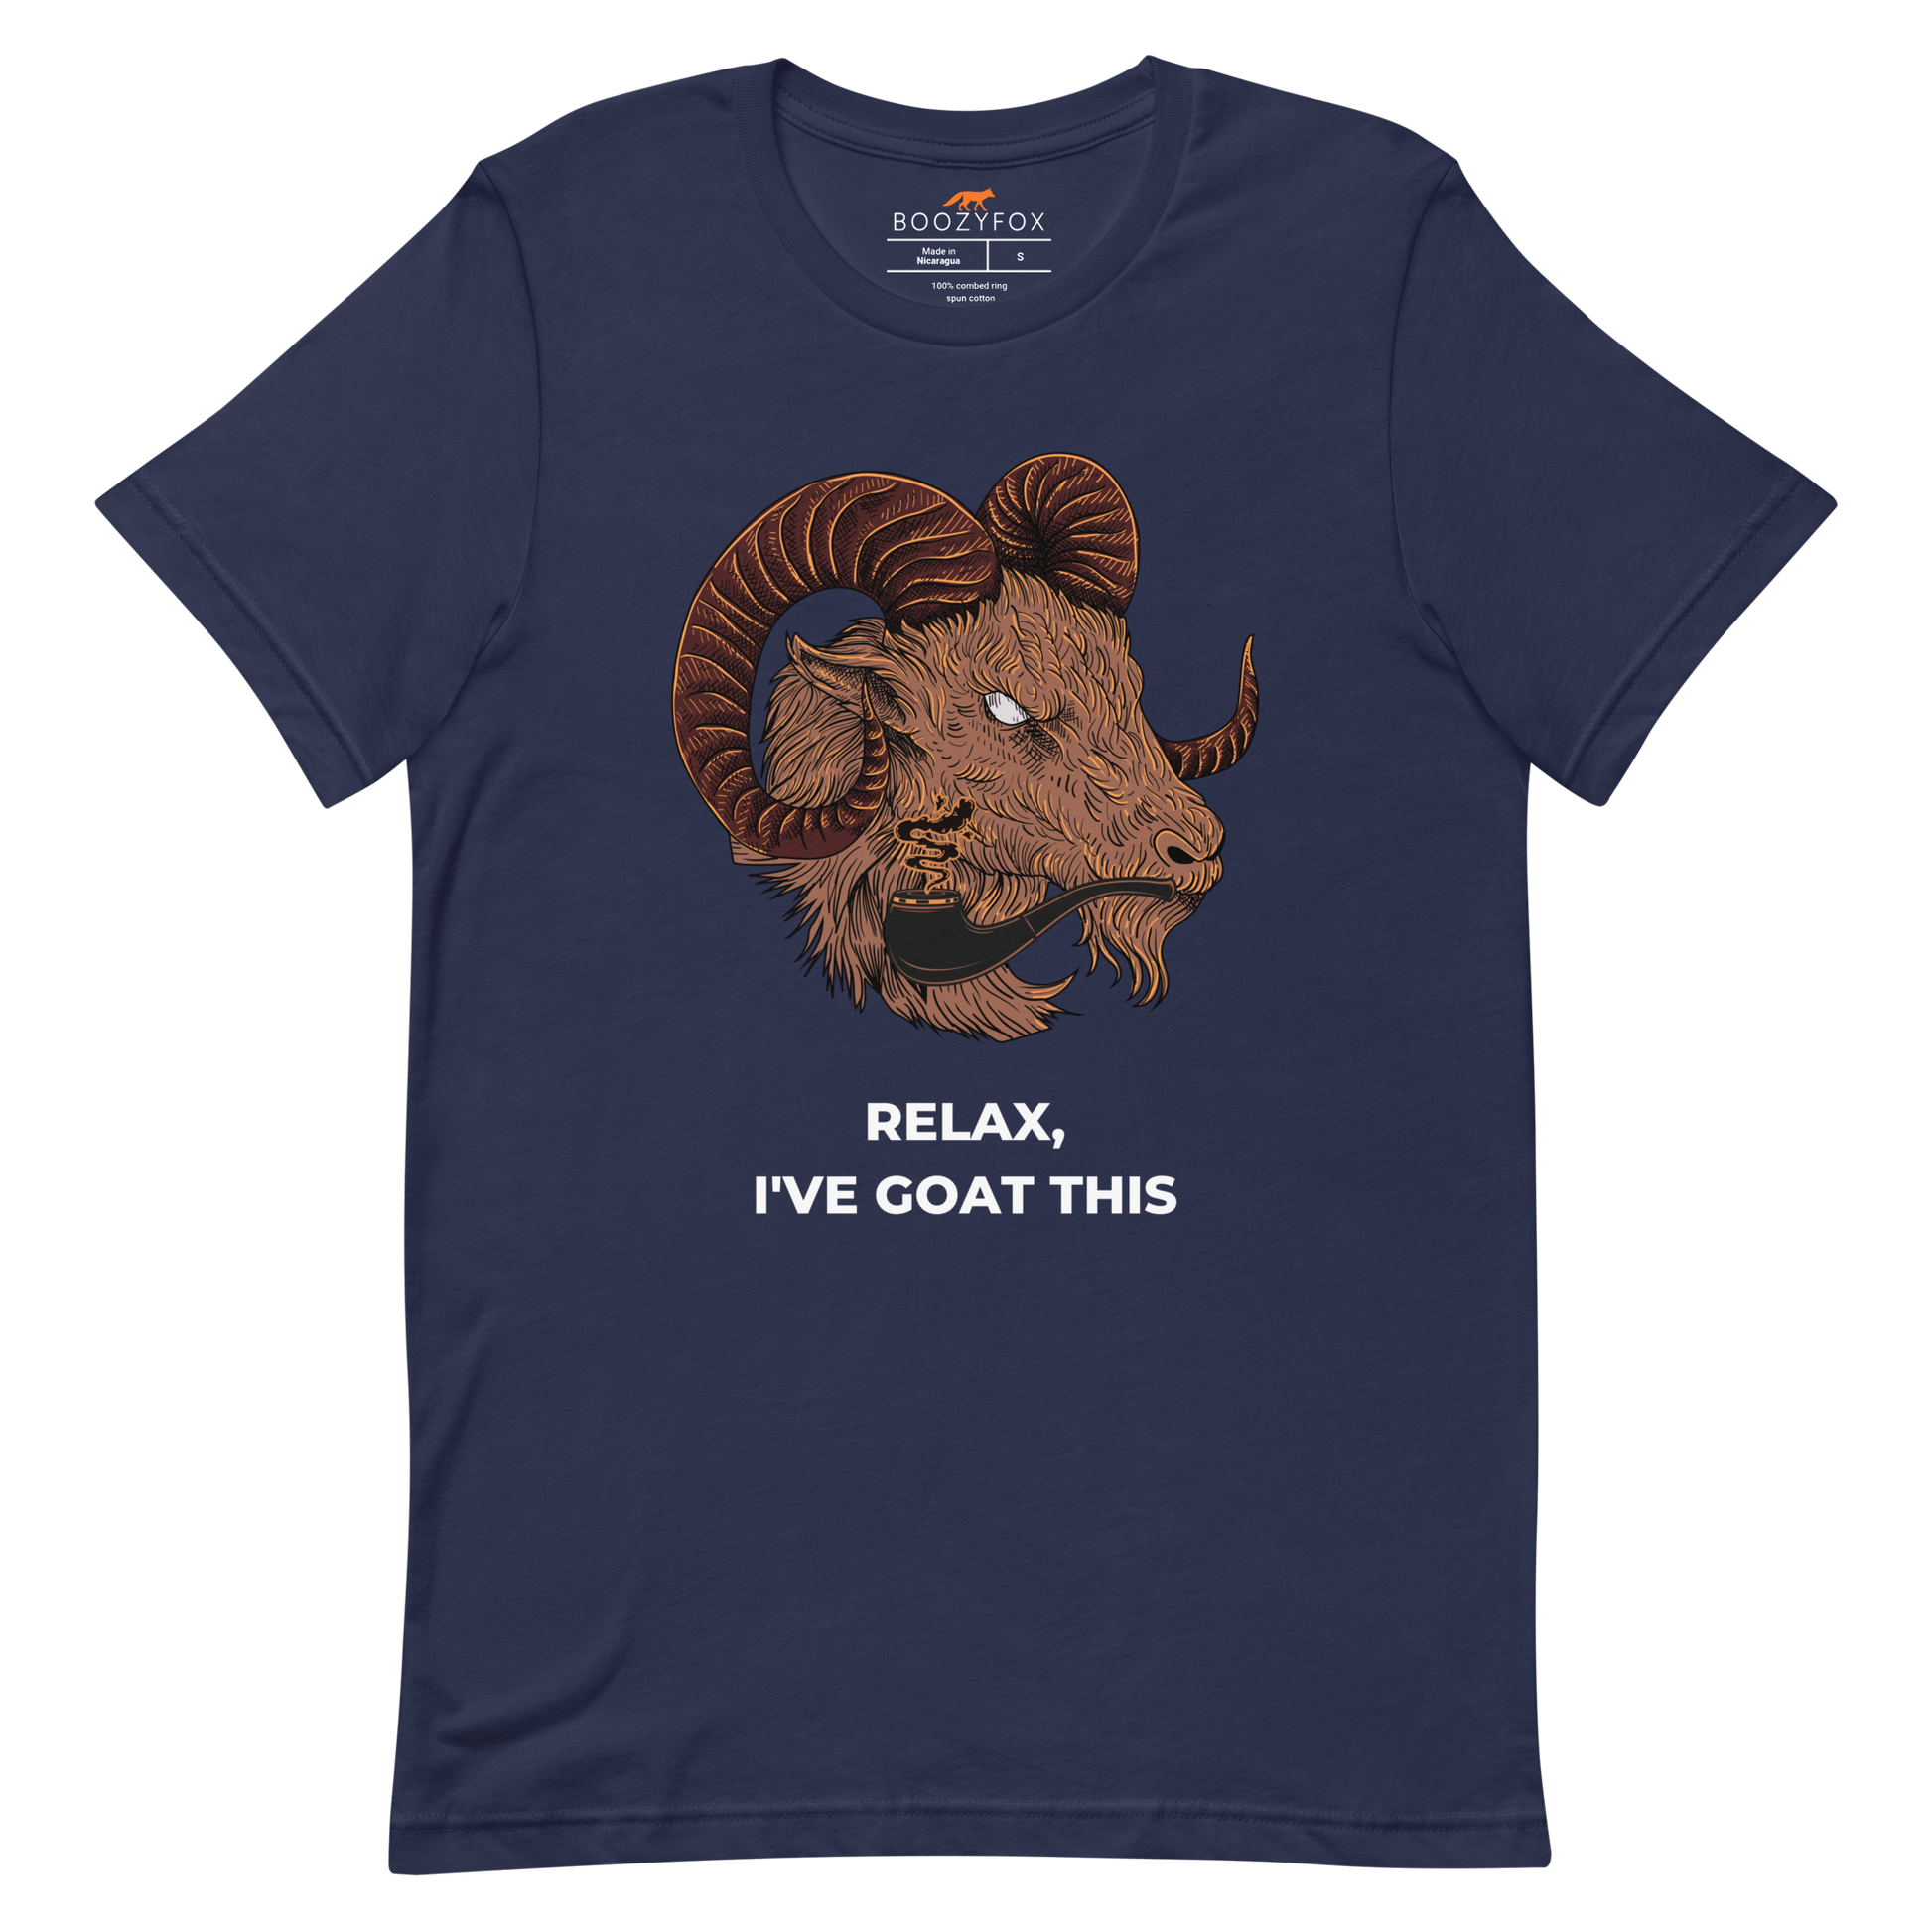 Navy Premium Goat T-Shirt featuring an amusing Relax I've Goat This graphic on the chest - Funny Graphic Goat Tees - Boozy Fox